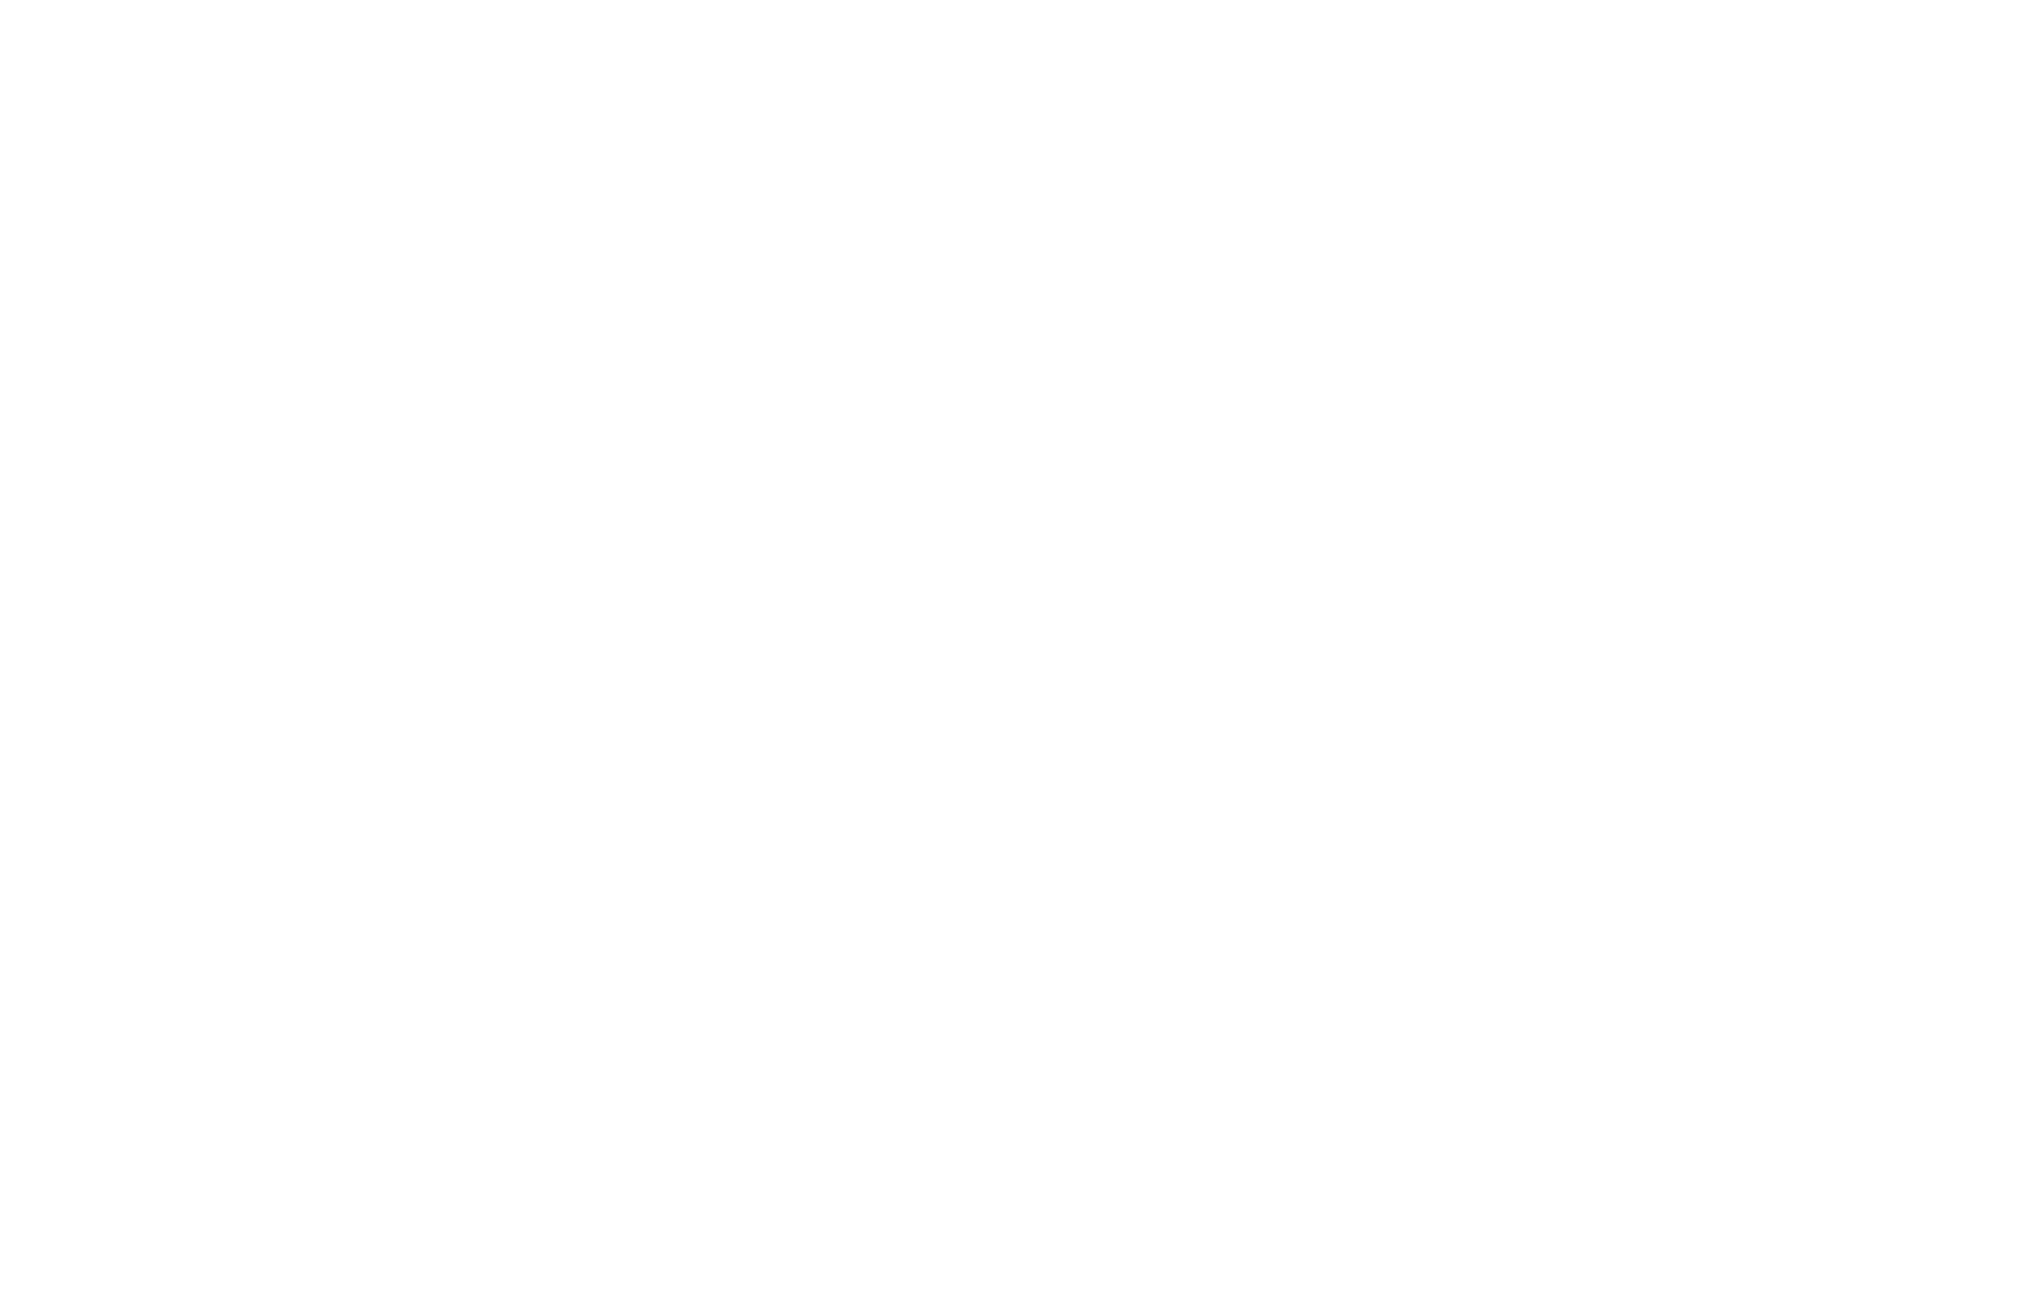 Welcome to the Happy Days logo